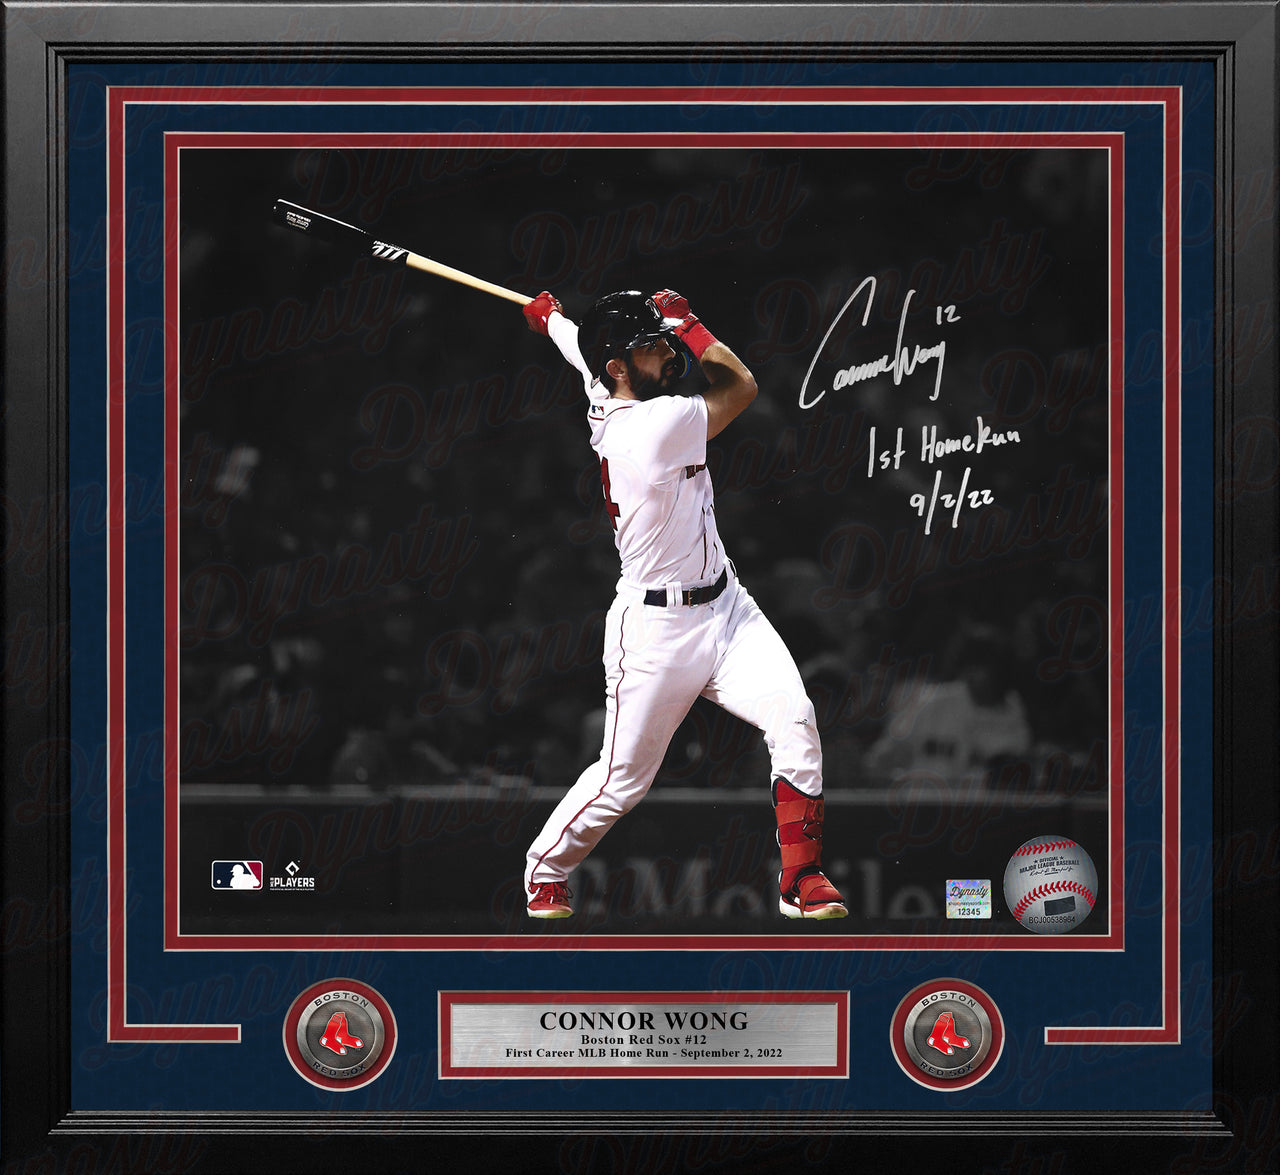 Connor Wong Boston Red Sox Autographed 16x20 Framed Spotlight Photo Inscribed 1st Home Run with Date